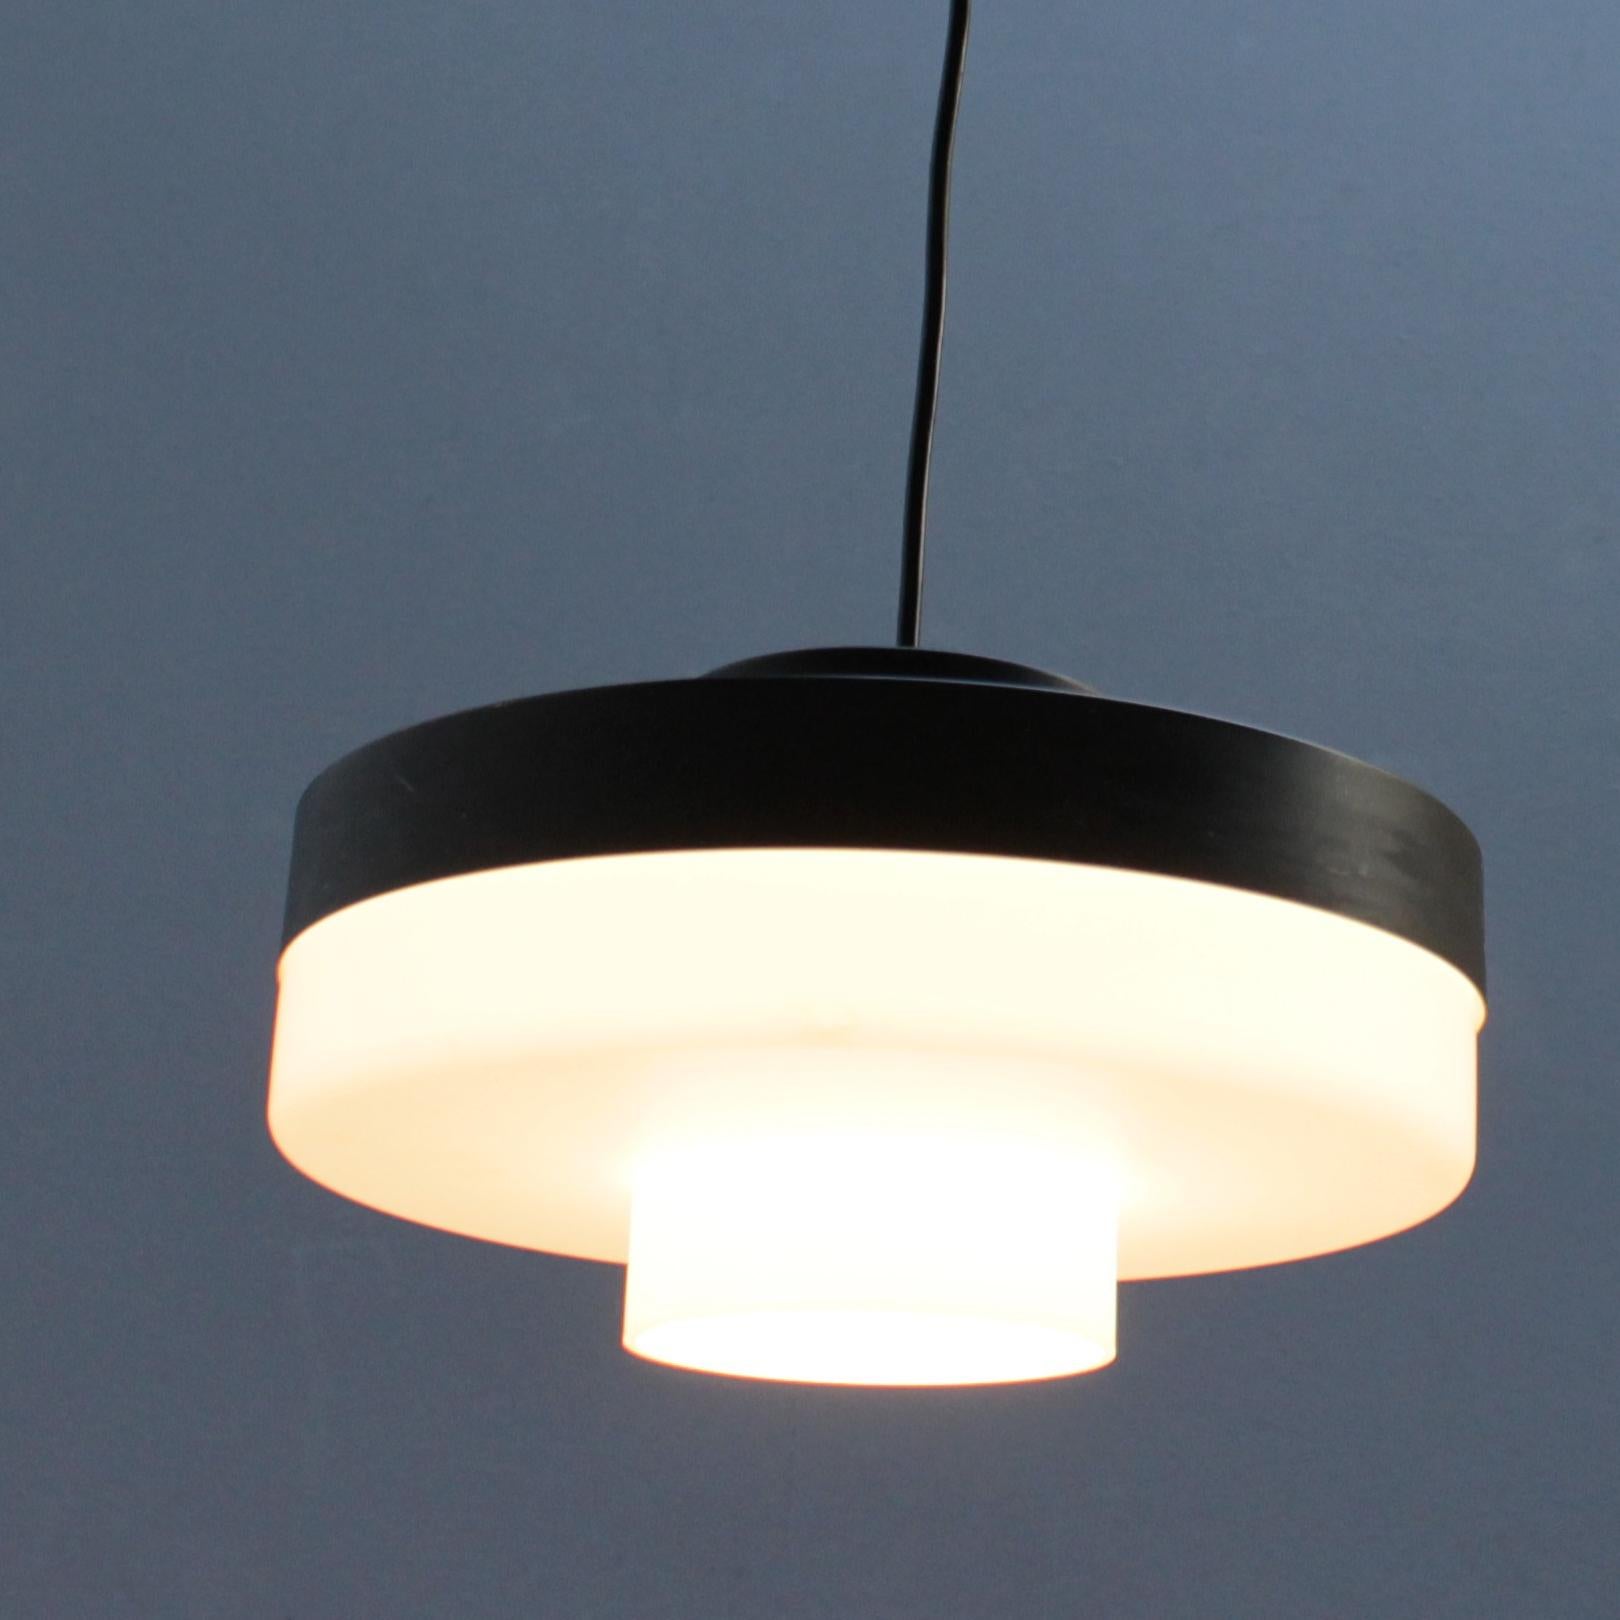 Lacquered Pendant Light by Li Helo for Raak, Amsterdam, 1968